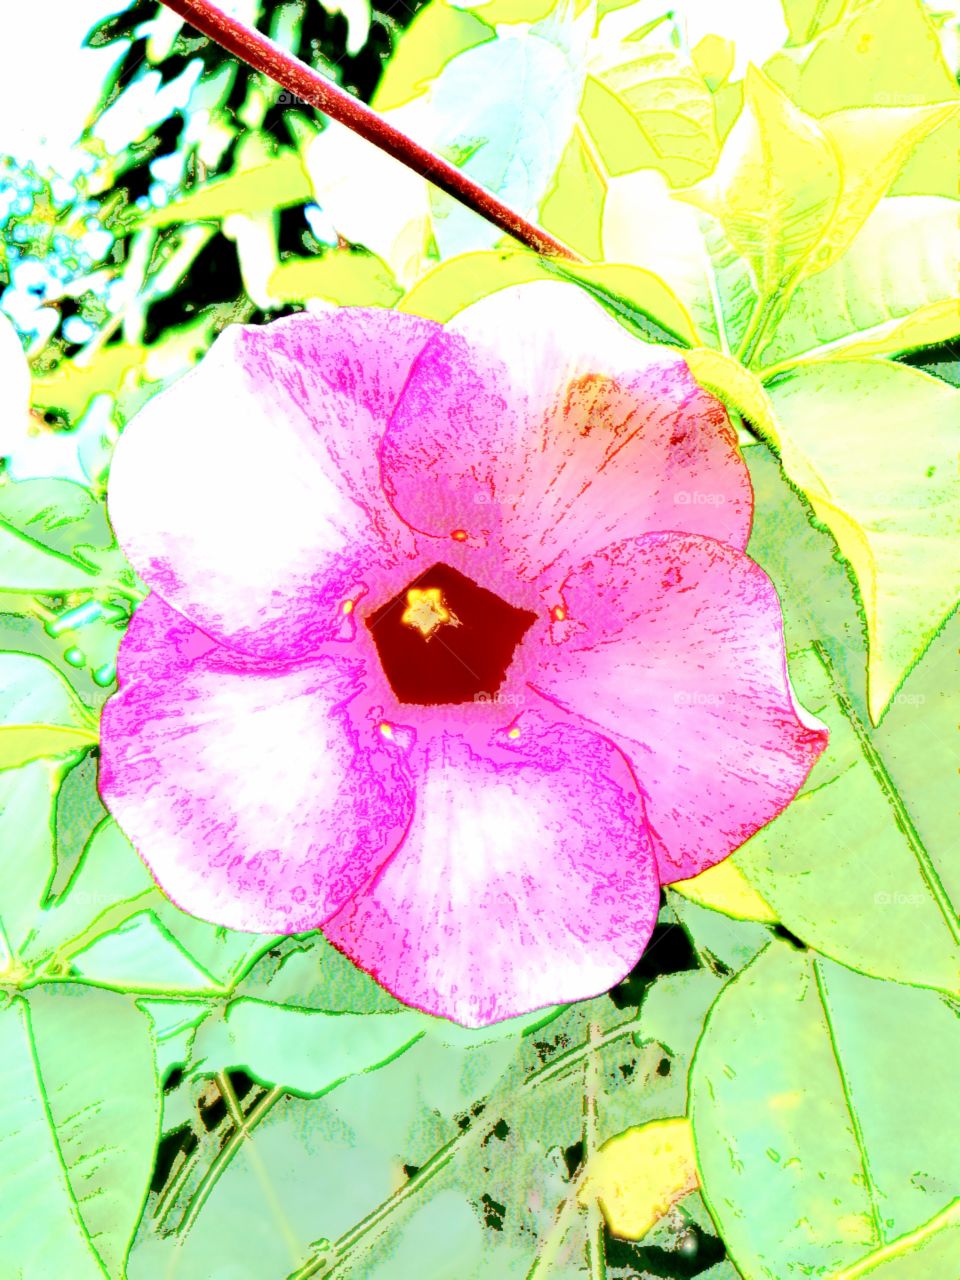 Crayon drawing of bright pink flower in tropical surrounding,
Mindoro, Island of Philippines